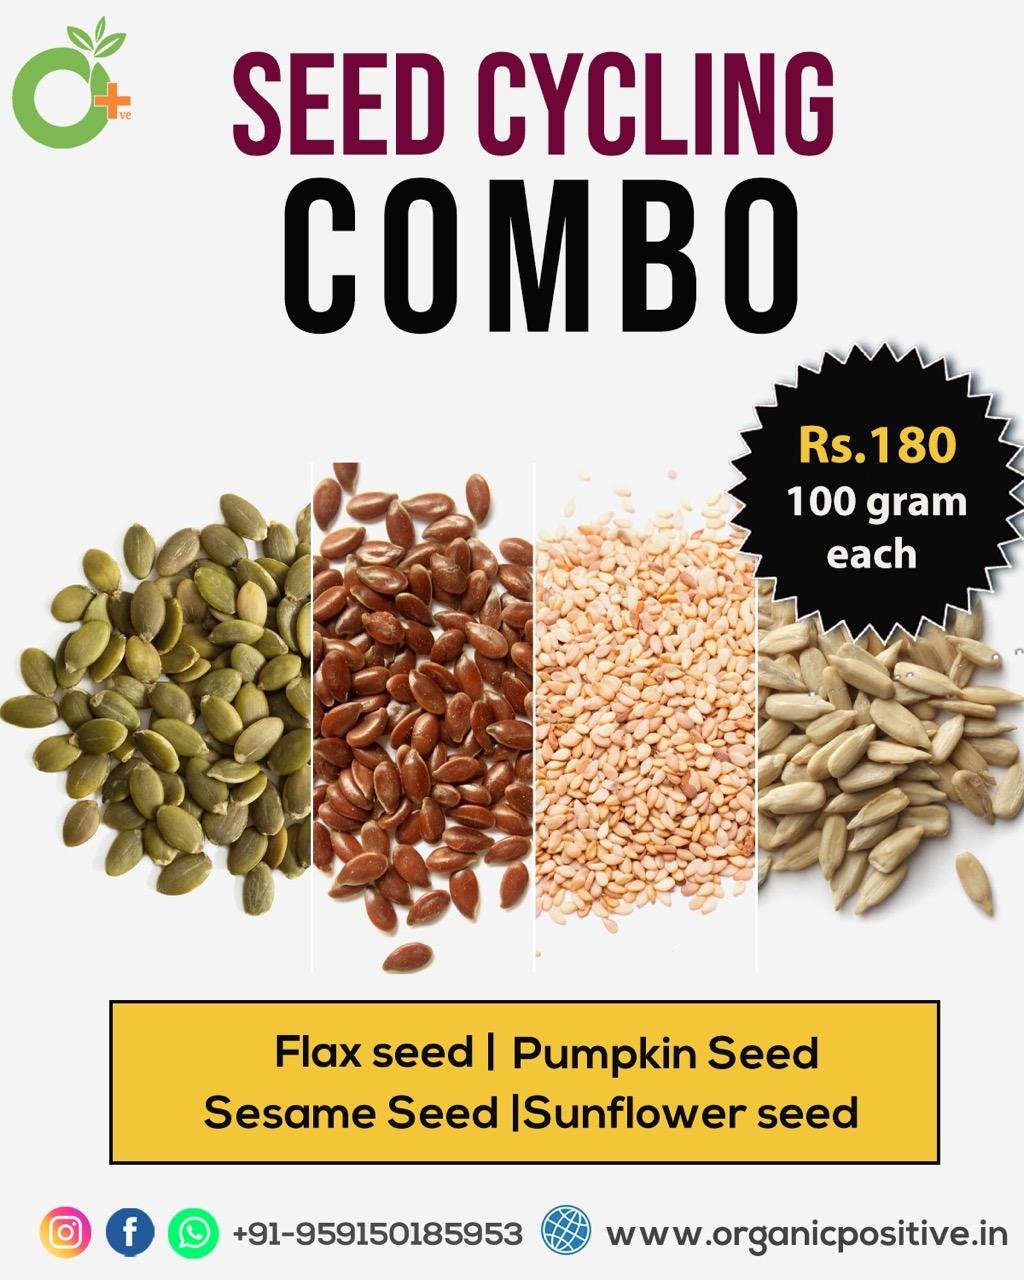 SEED CYCLING COMBO – 100 G EACH